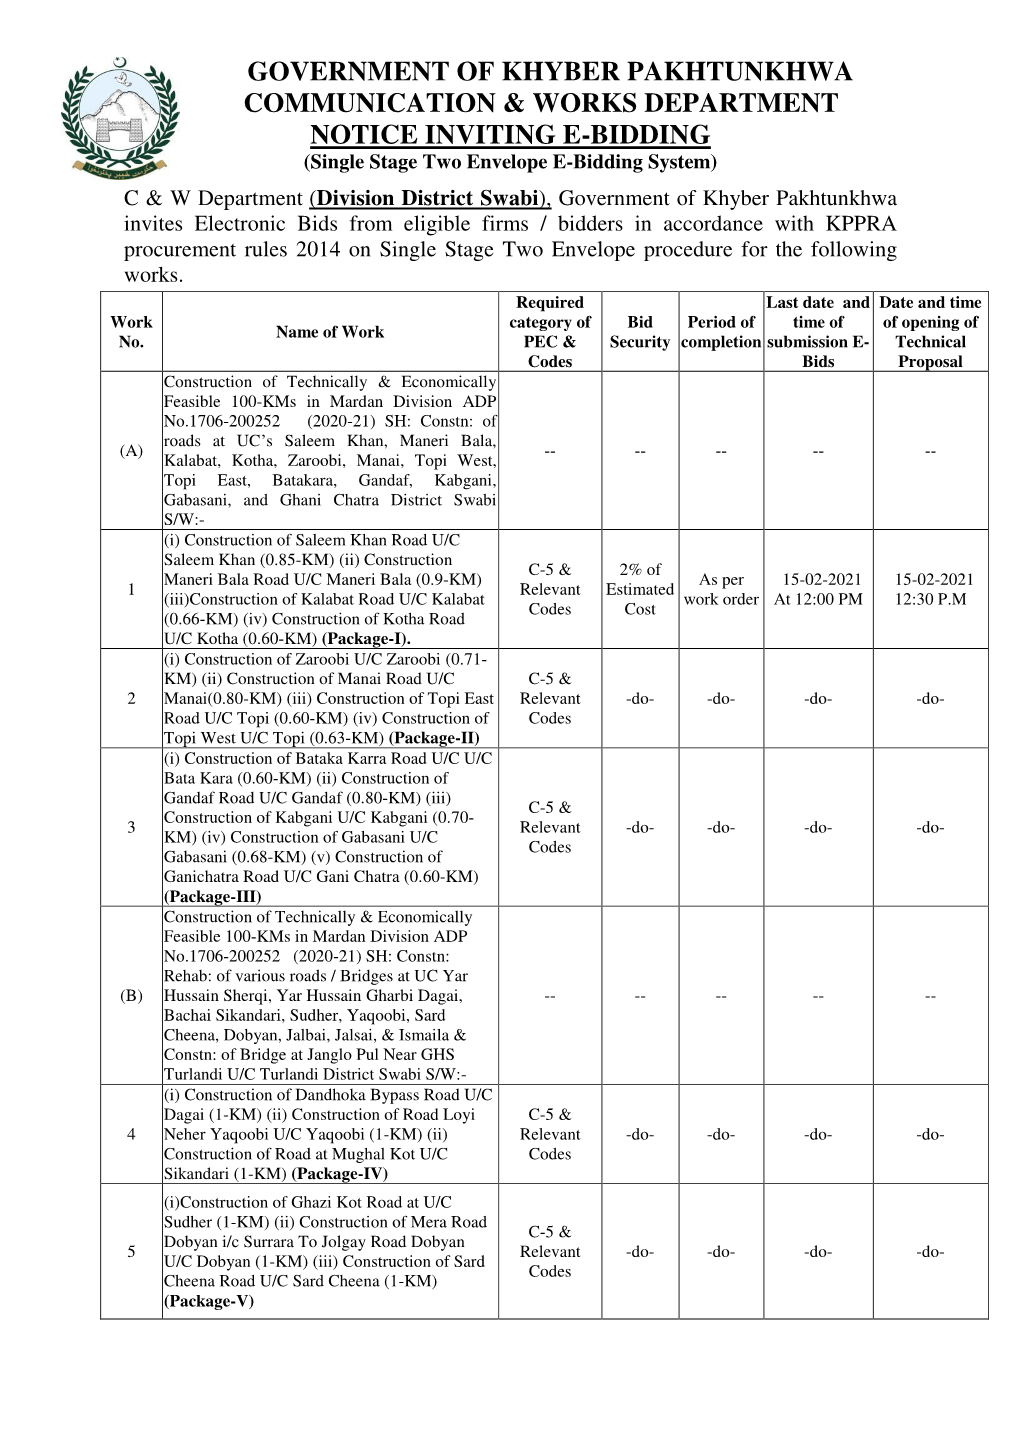 Government of Khyber Pakhtunkhwa Communication & Works Department Notice Inviting E-Bidding